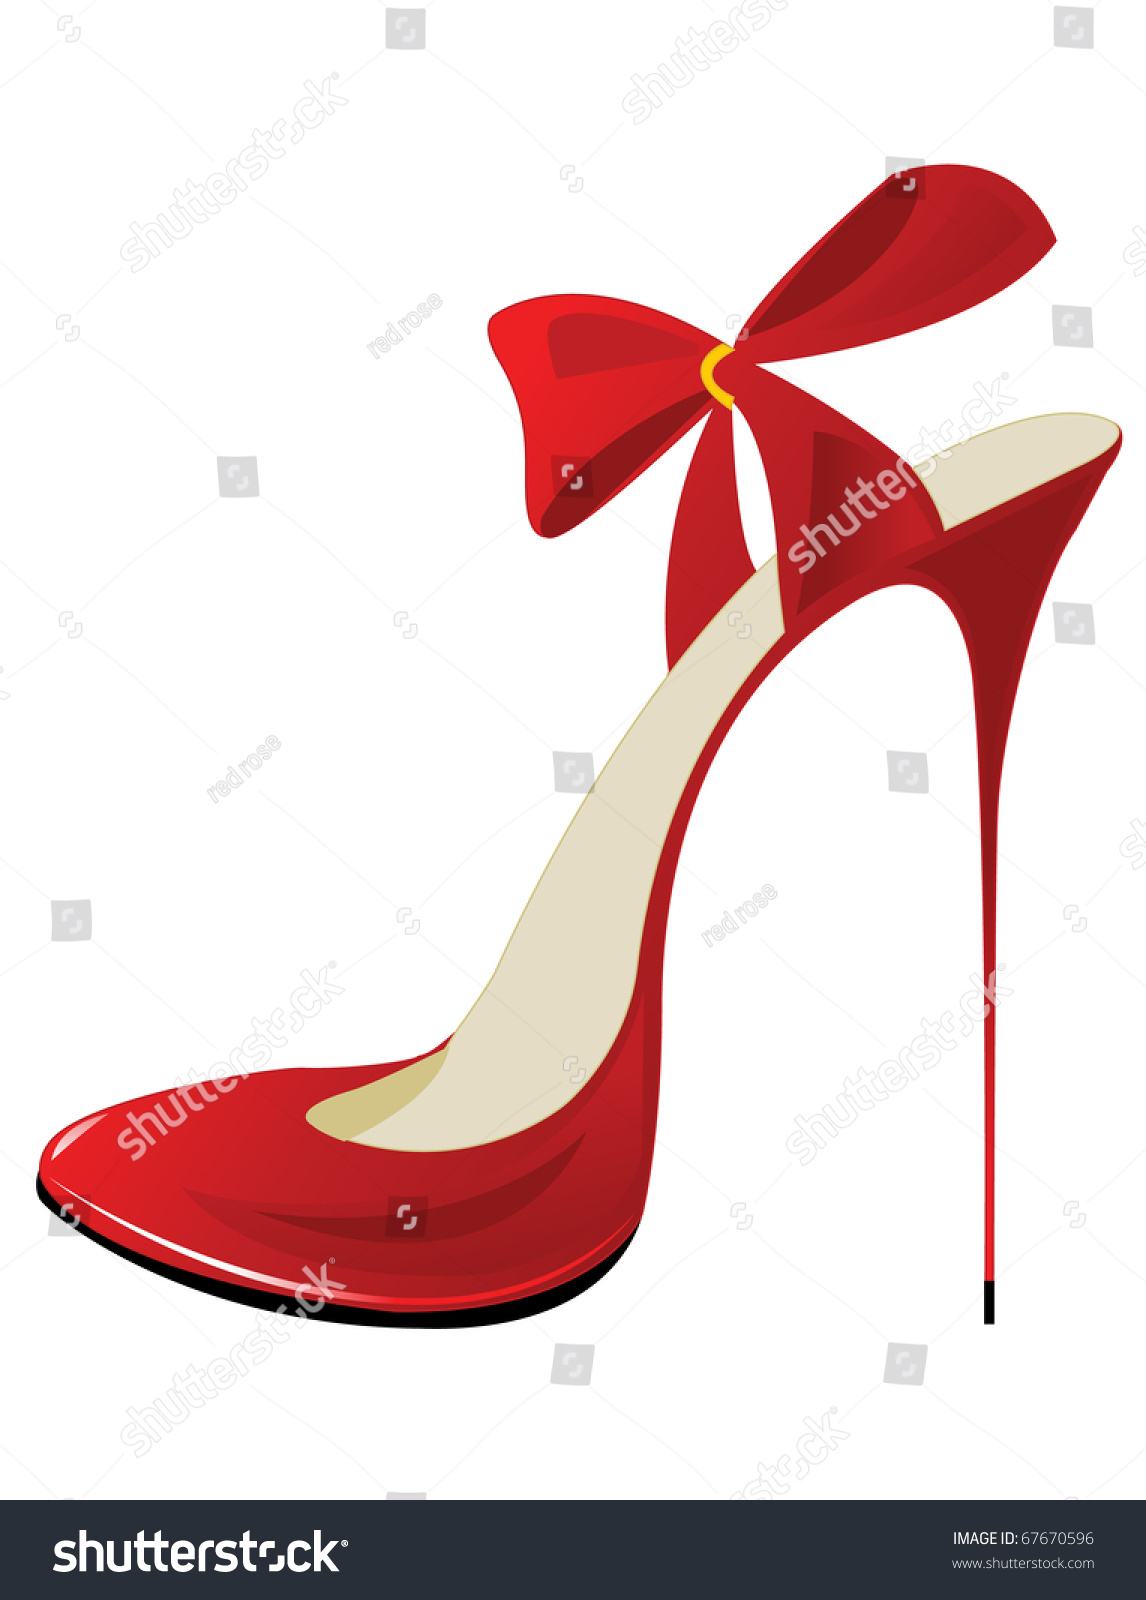 Red Sexy Shoes Stock Vector 67670596 - Shutterstock